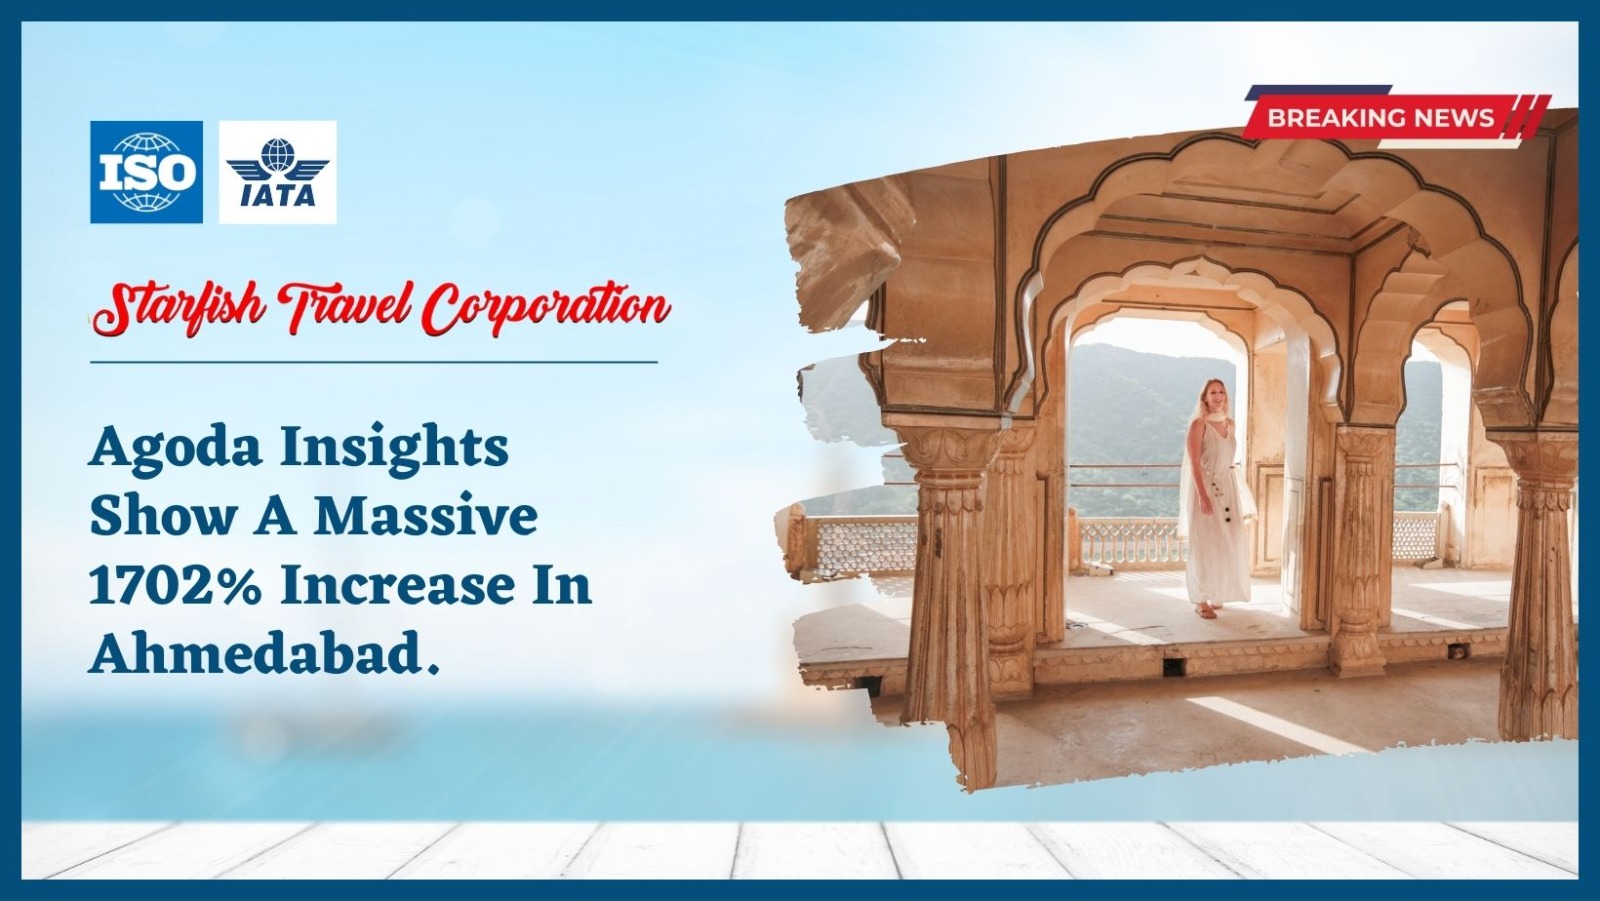 You are currently viewing Agoda Insights Show A Massive 1702% Increase In Ahmedabad.